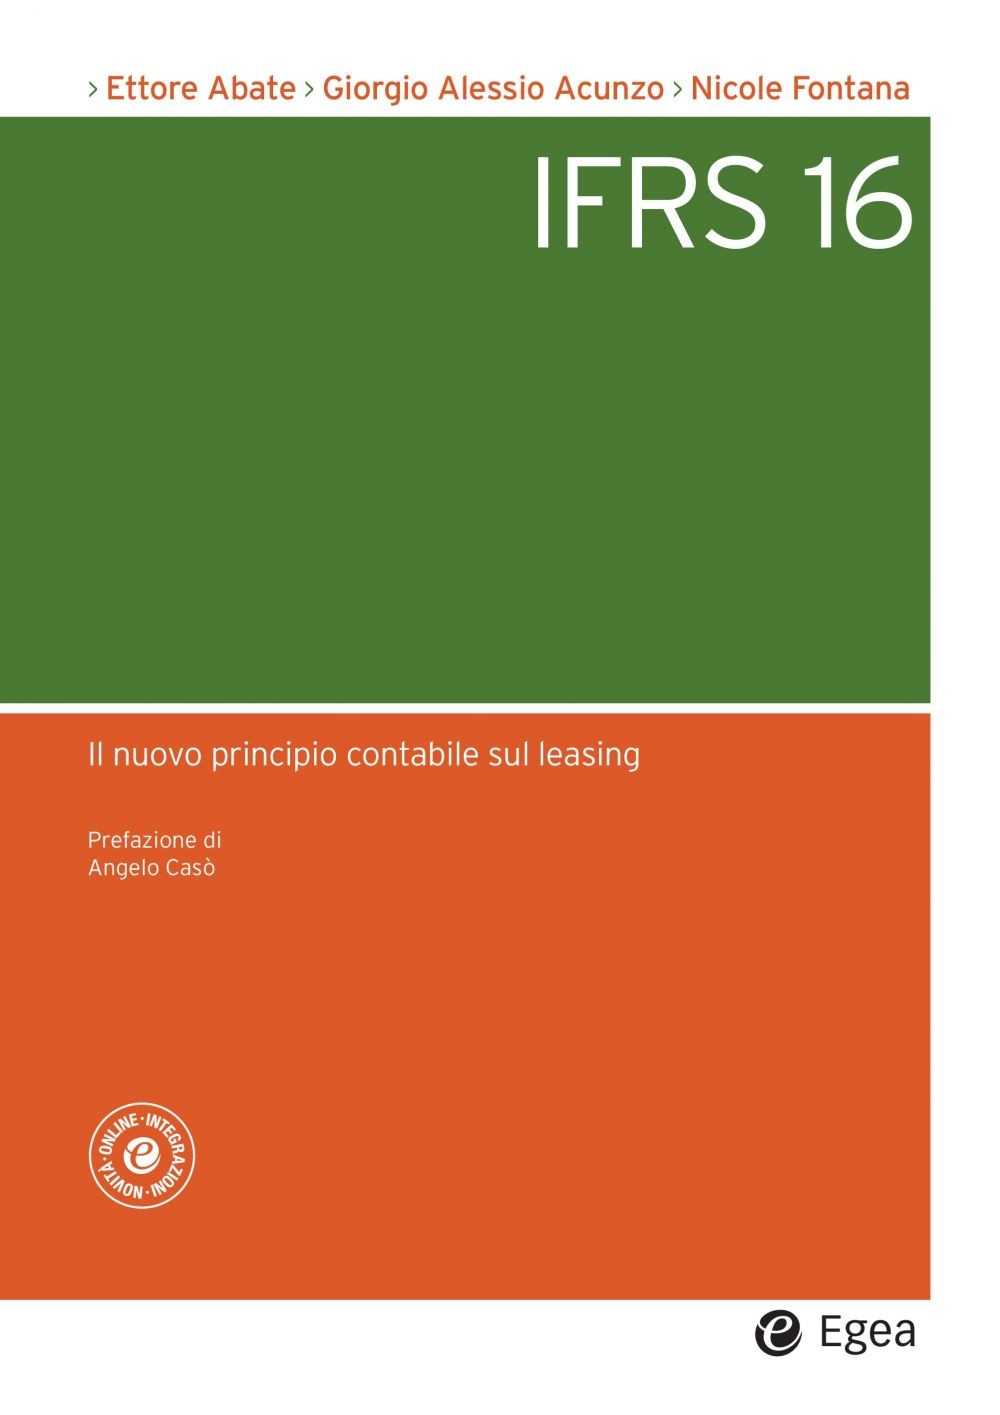 IFRS 16 - Librerie.coop